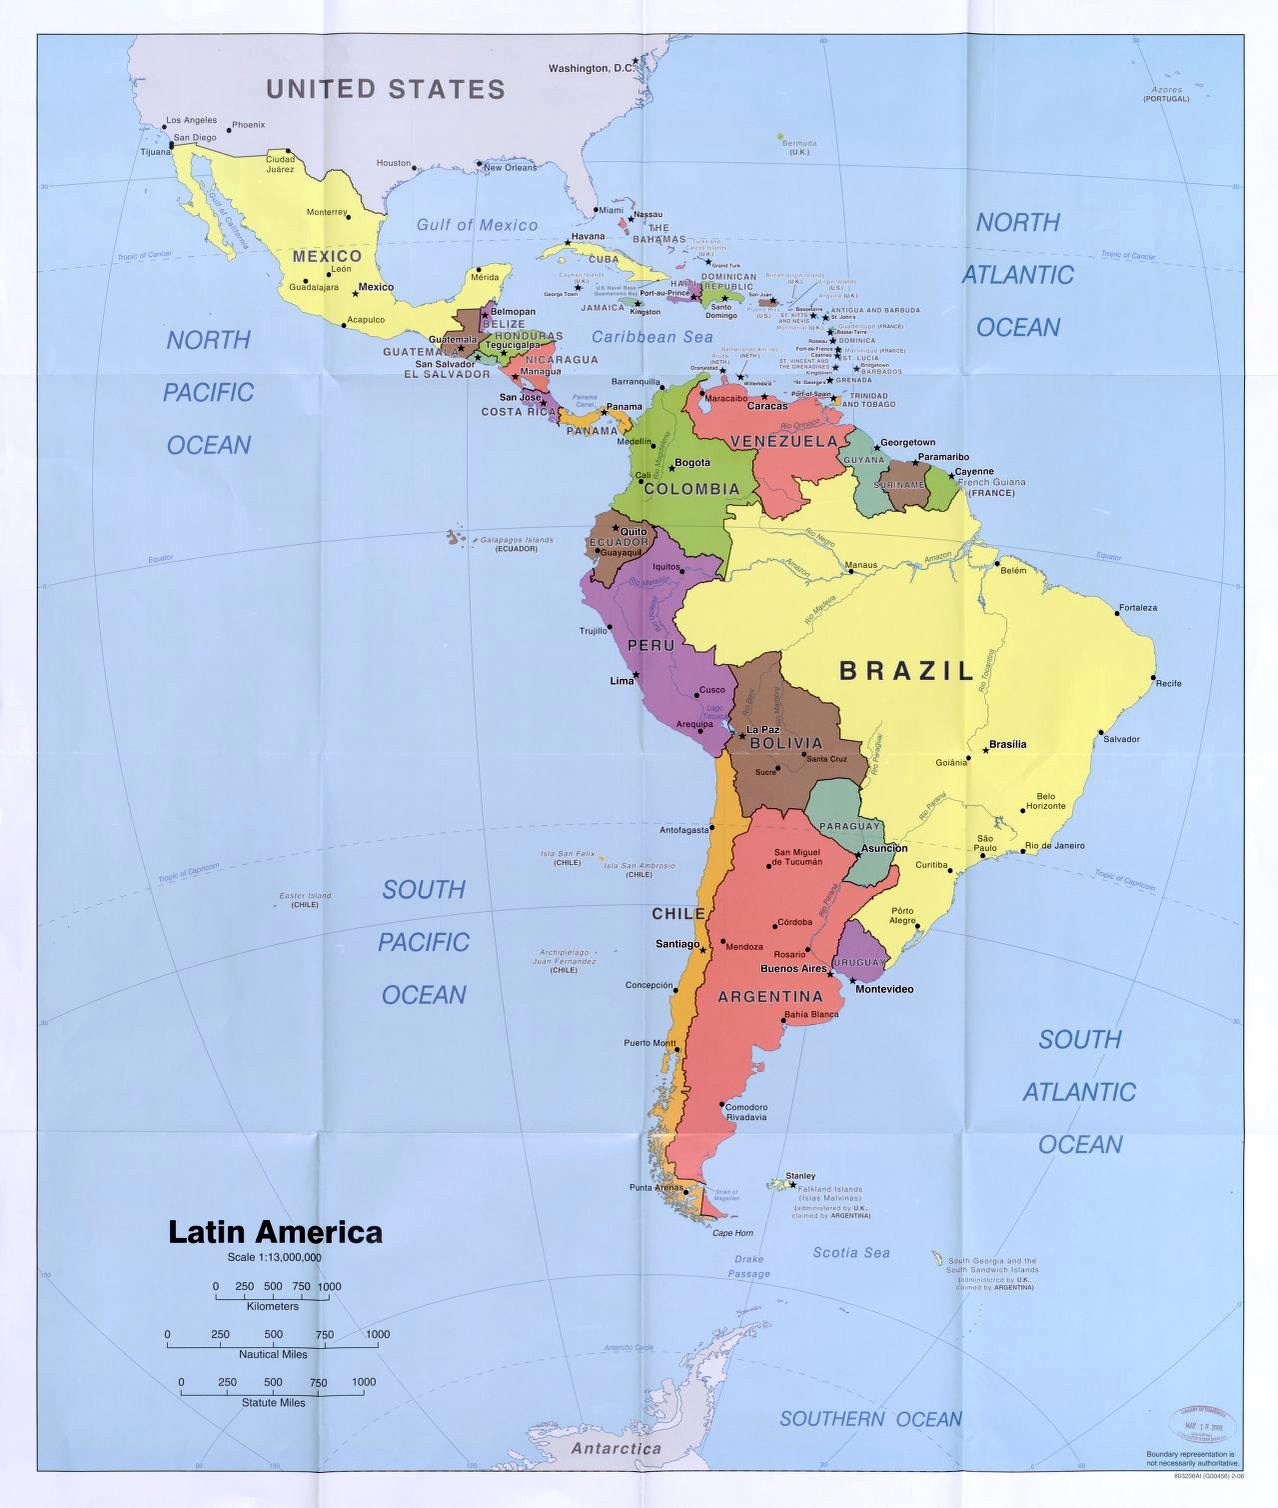 Map of Latin America, published Washington, D.C.: Central Intelligence Agency (Library of Congress)